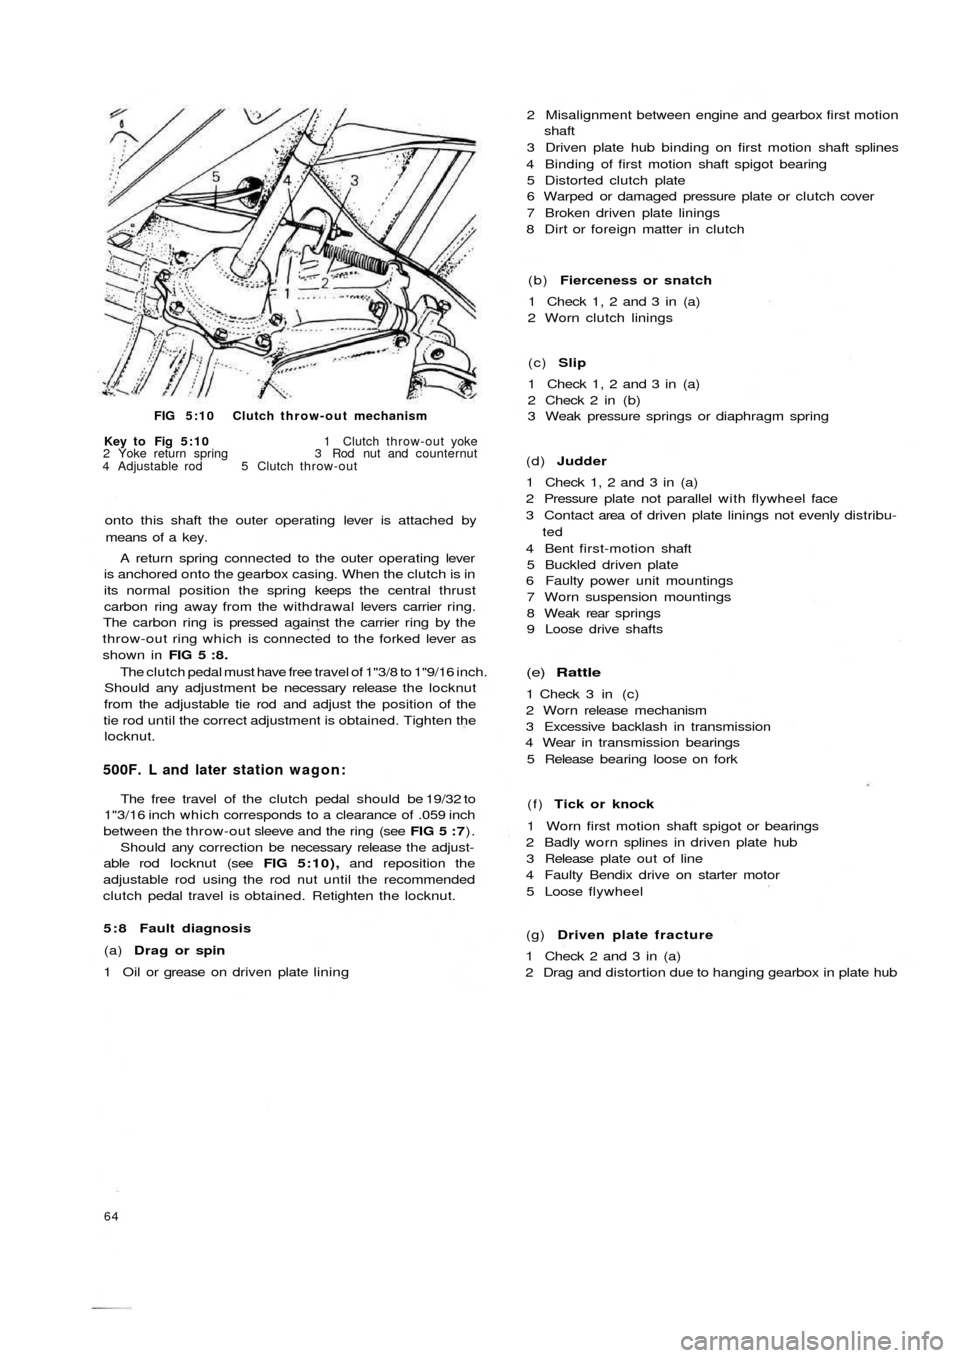 FIAT 500 1957 1.G Workshop Manual FIG 5:10 Clutch throw-out mechanism
Key to  Fig  5:10 1 Clutch throw-out yoke
2 Yoke return spring 3 Rod nut and counternut
4 Adjustable rod  5  Clutch throw-out
onto this shaft the outer operating le